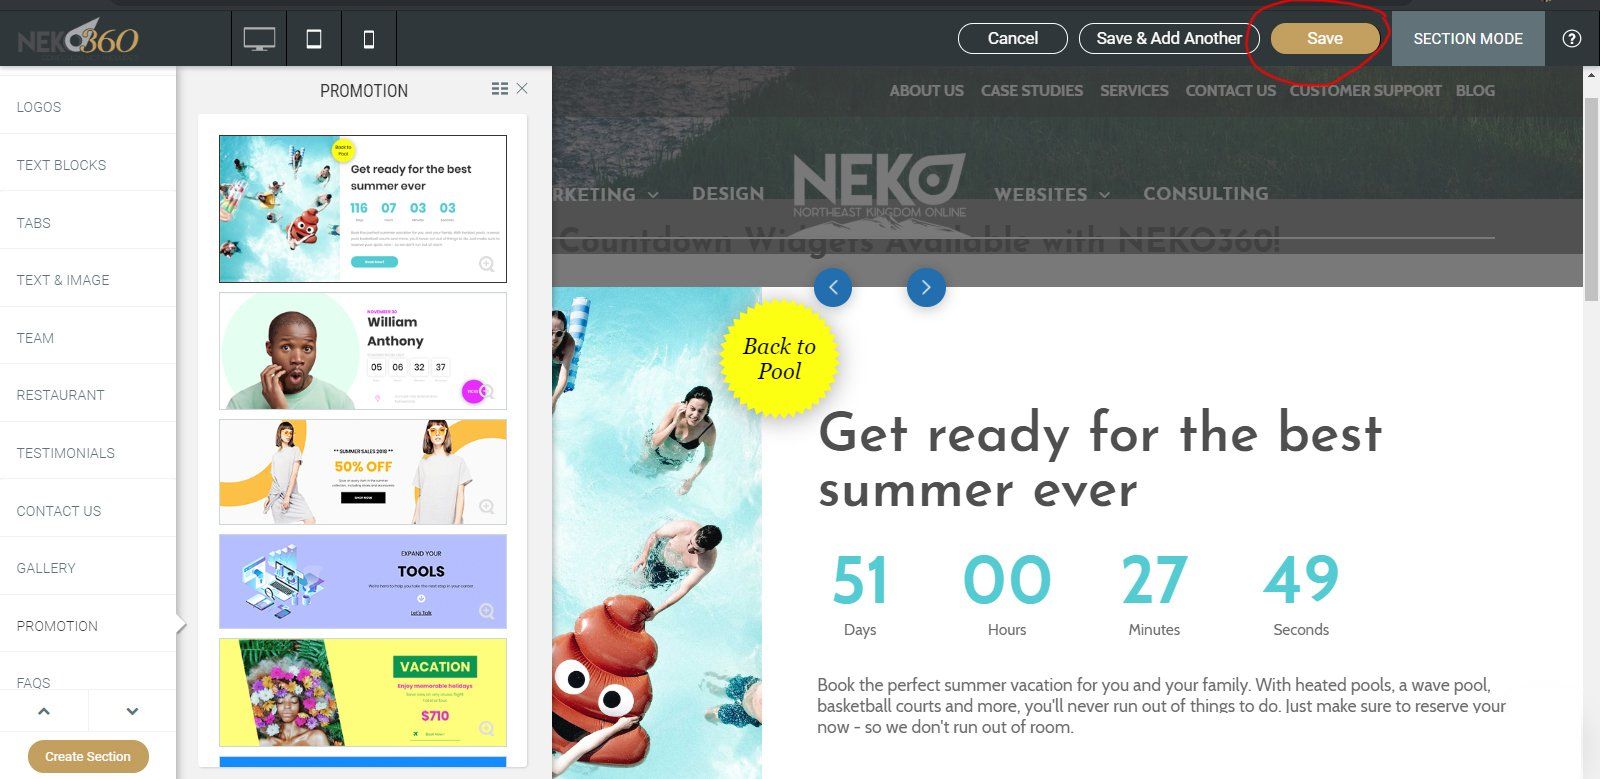 How to save sections on your NEKO360 website?